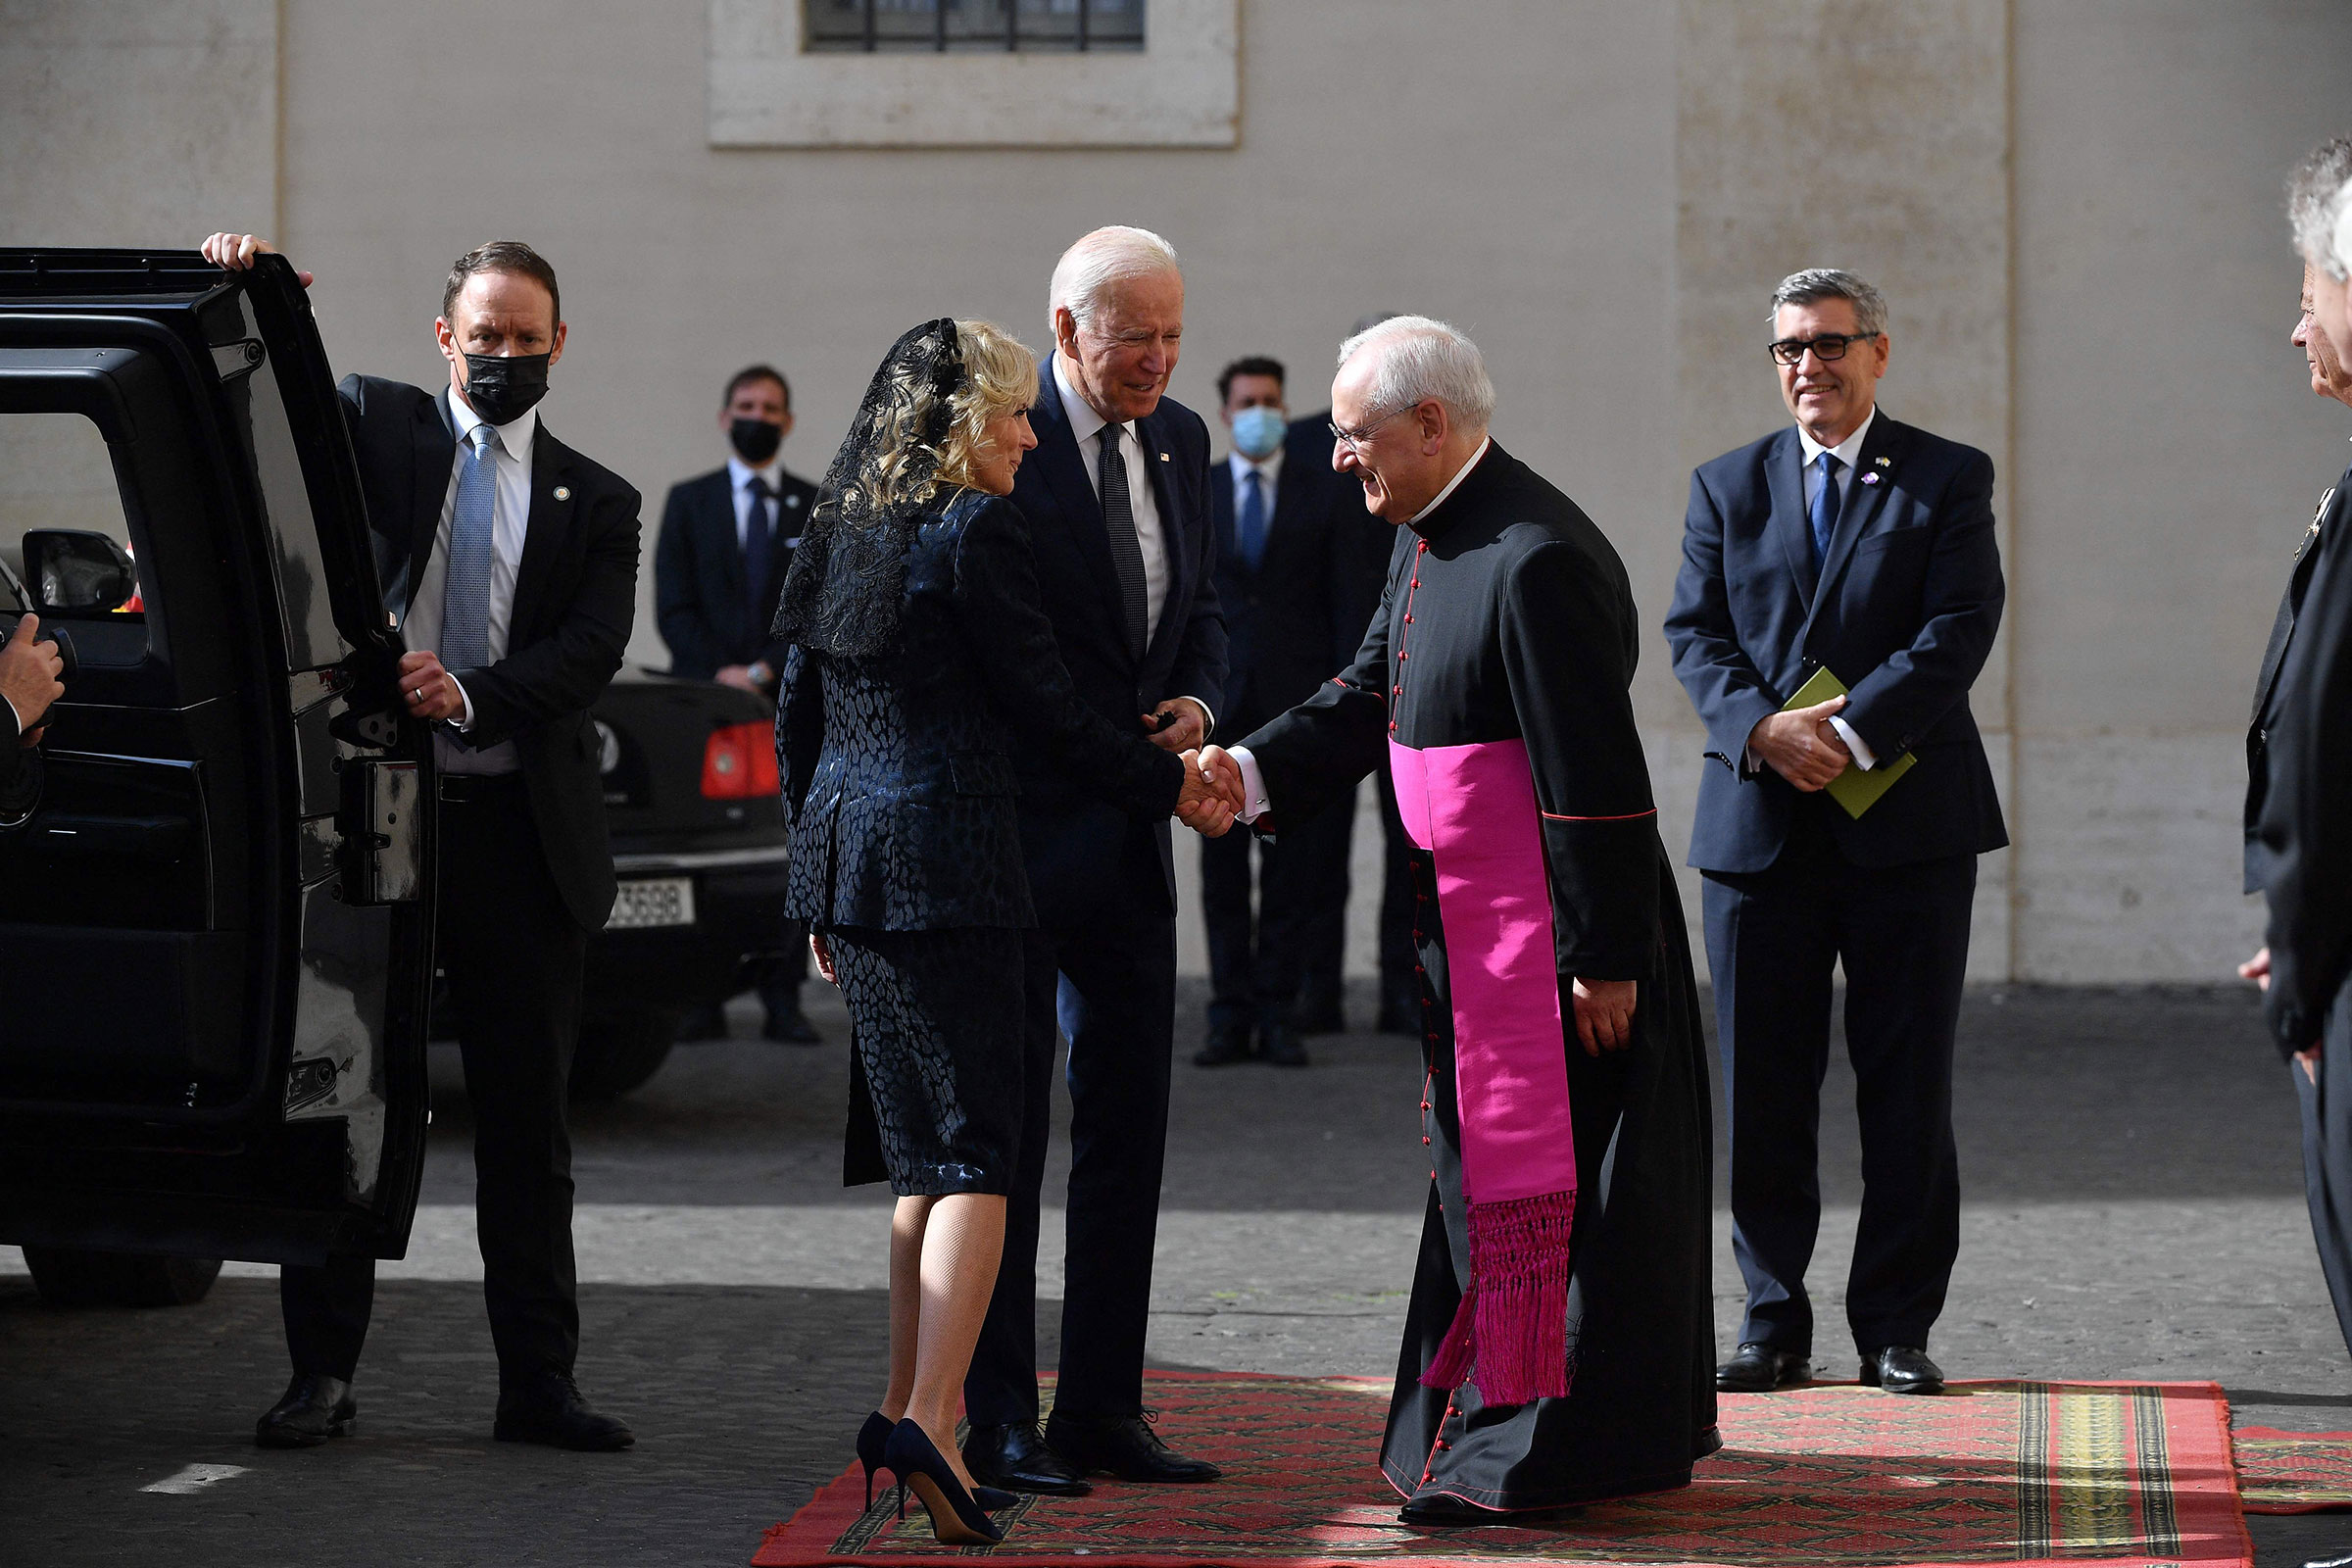 U.S. President Joe Biden and First Lady Jill Biden are greeted by the Head of the Papal Household, Mons. Leonardo Sapienza, as they arrive at San Damaso courtyard in The Vatican on October 29, 2021 for a private audience with the Pope. (Tiziana Fabi—AFP/Getty Images)